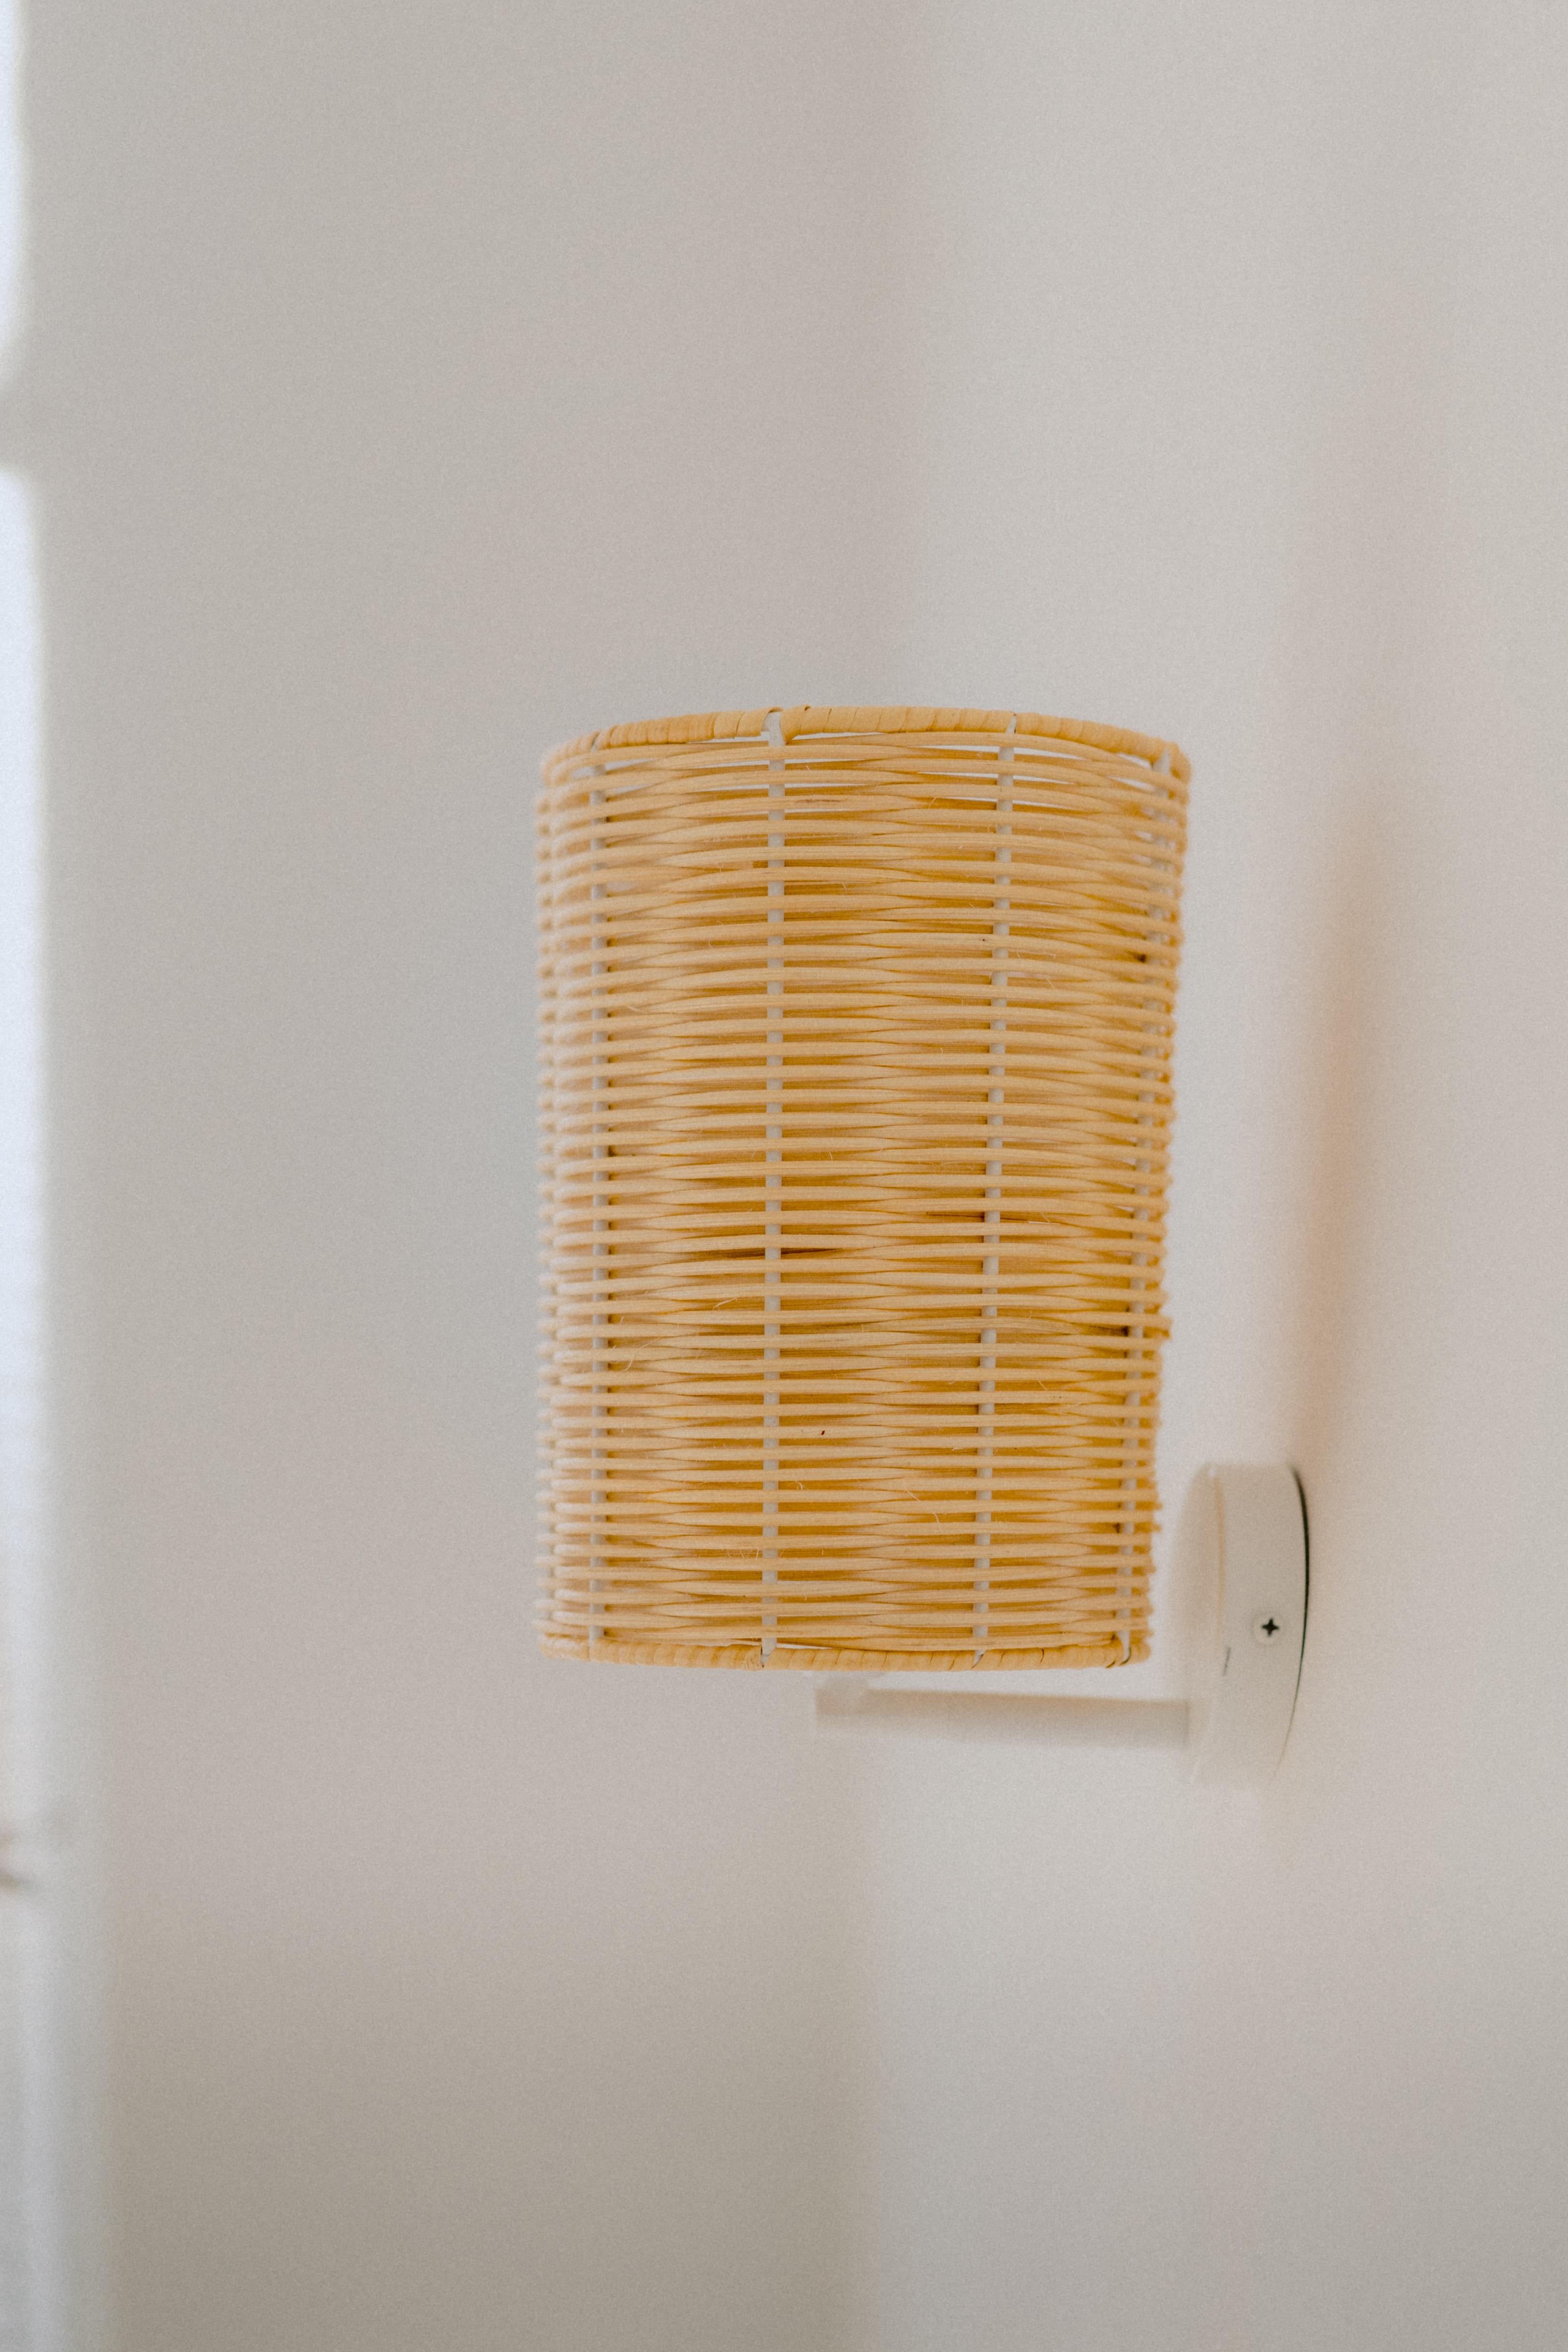 Espagnol Ands for Objects fors Contemporary, Handmade, Wall Lamp, Rattan Cylinder, by Mediterranean Objects en vente